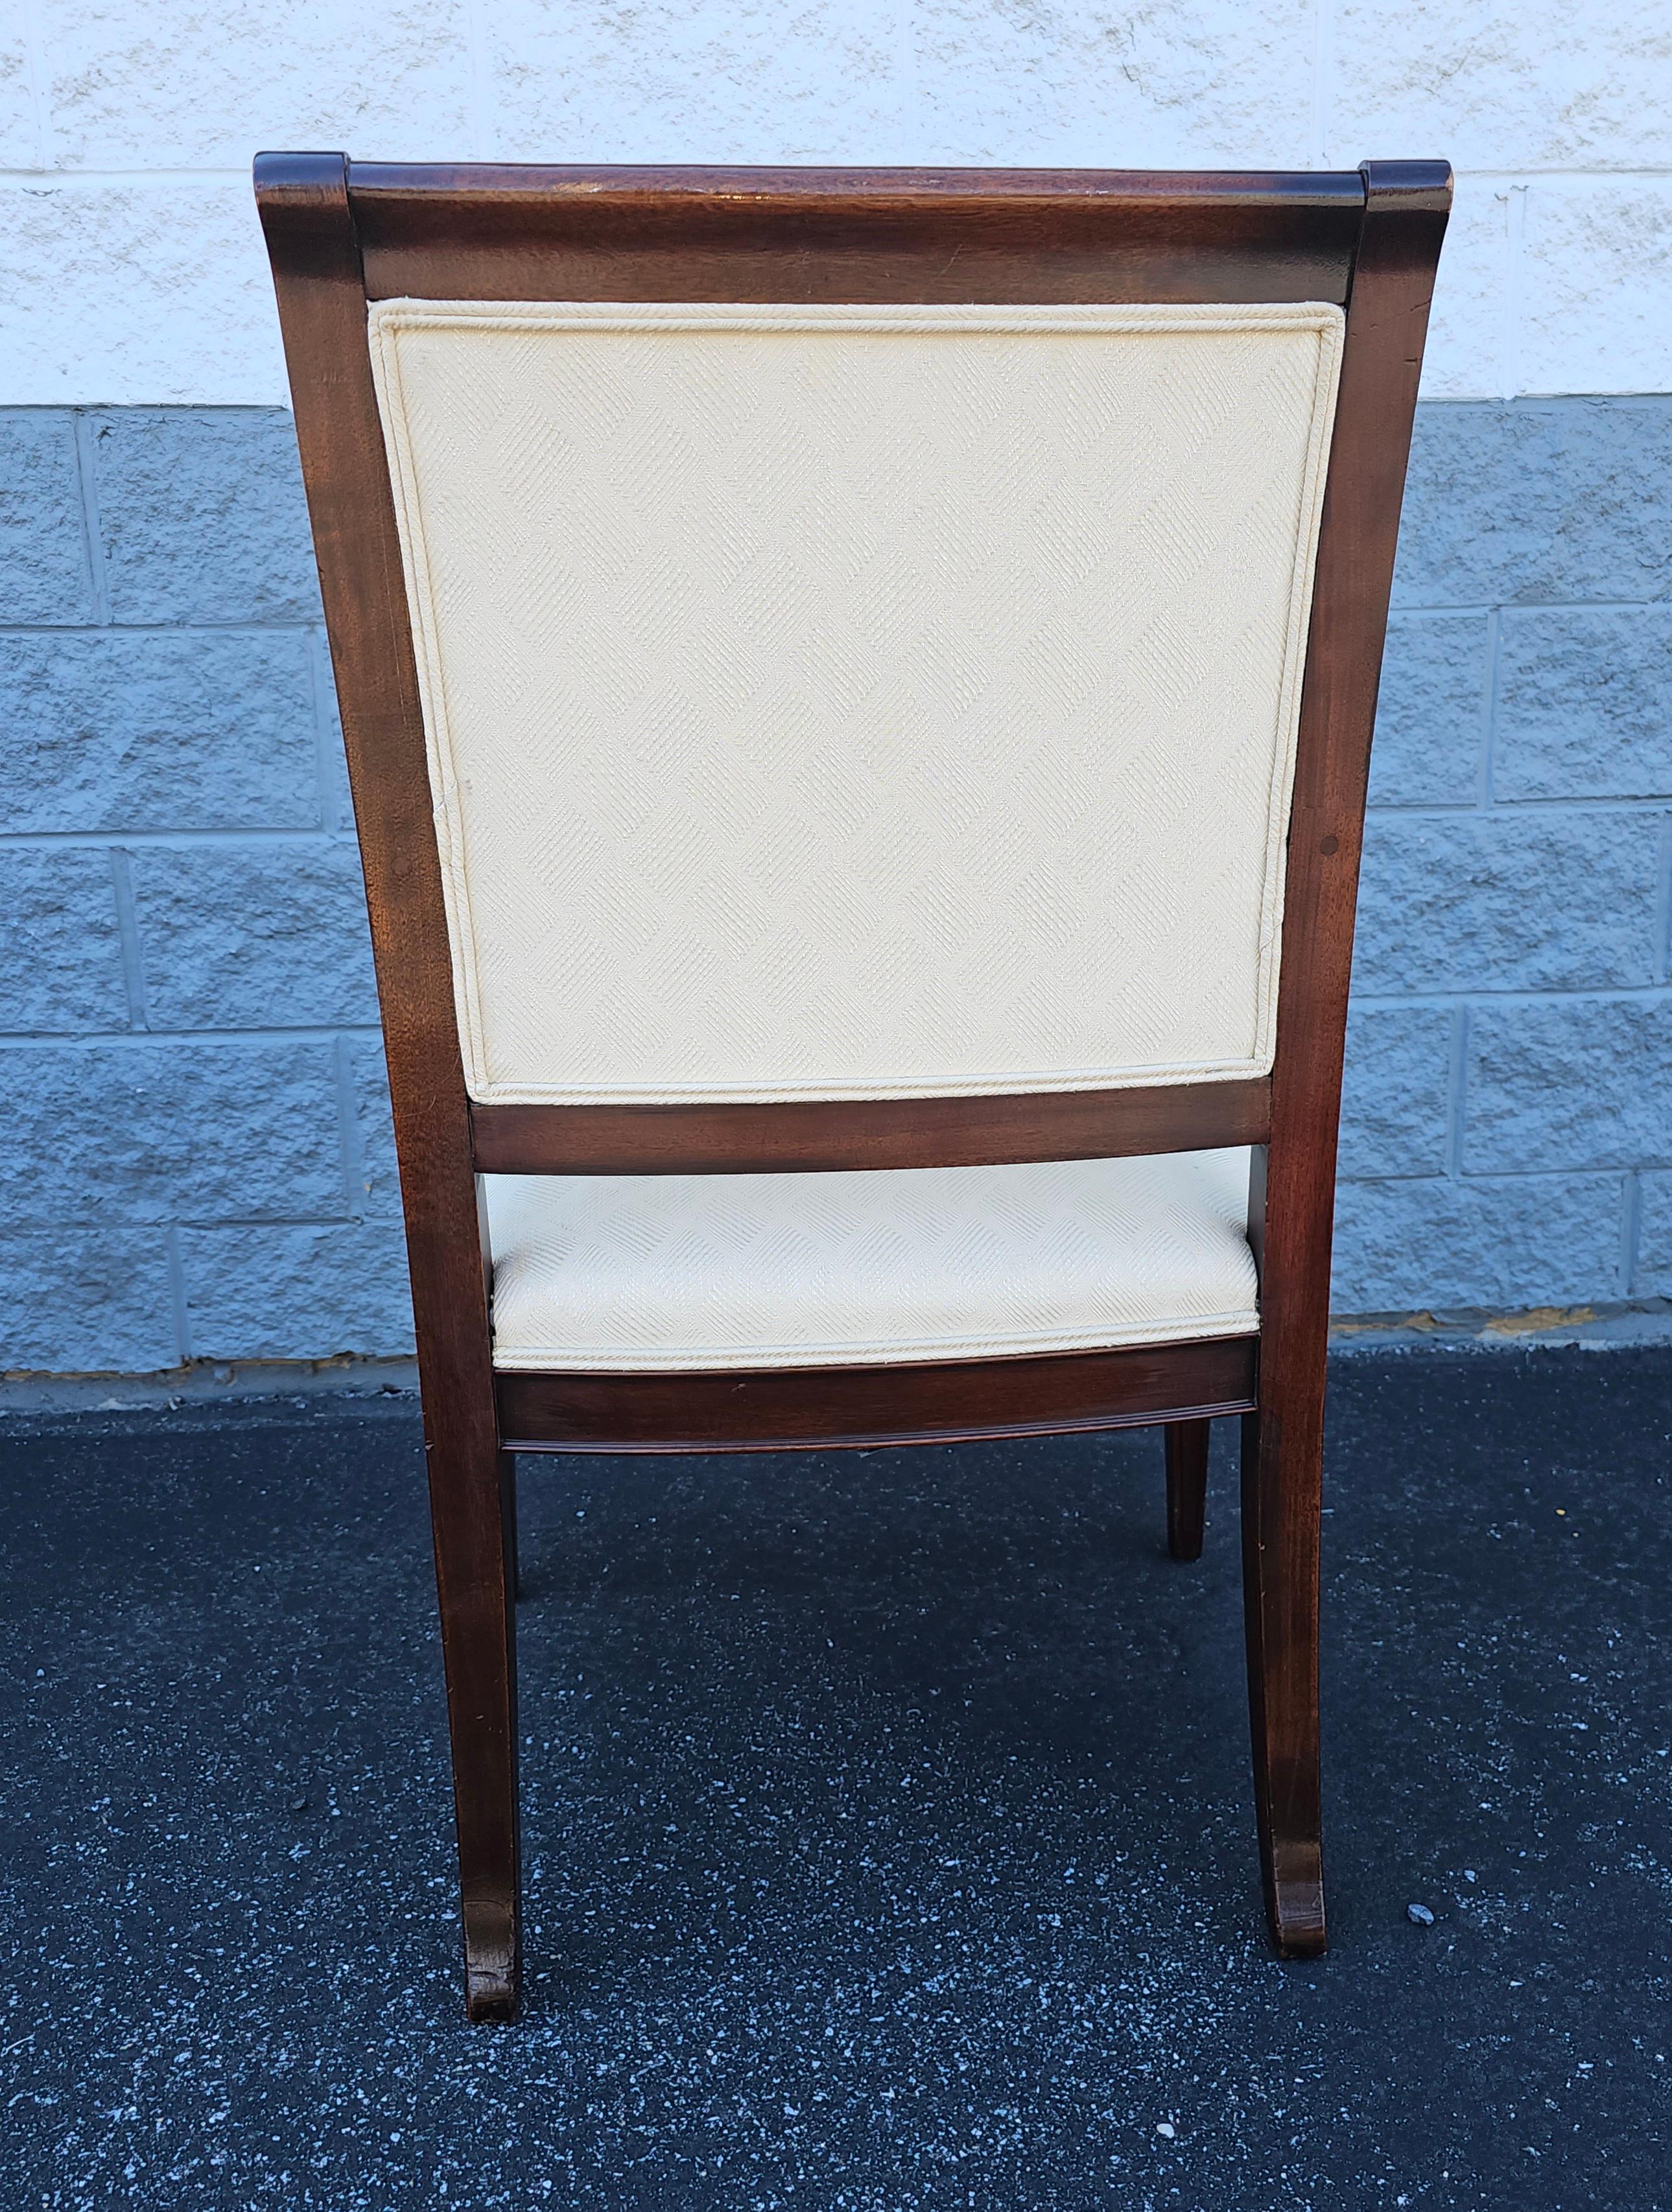 20th C. Hickory Chair Federal Style Mahogany Inlaid and Upholstered Arm Chair For Sale 2